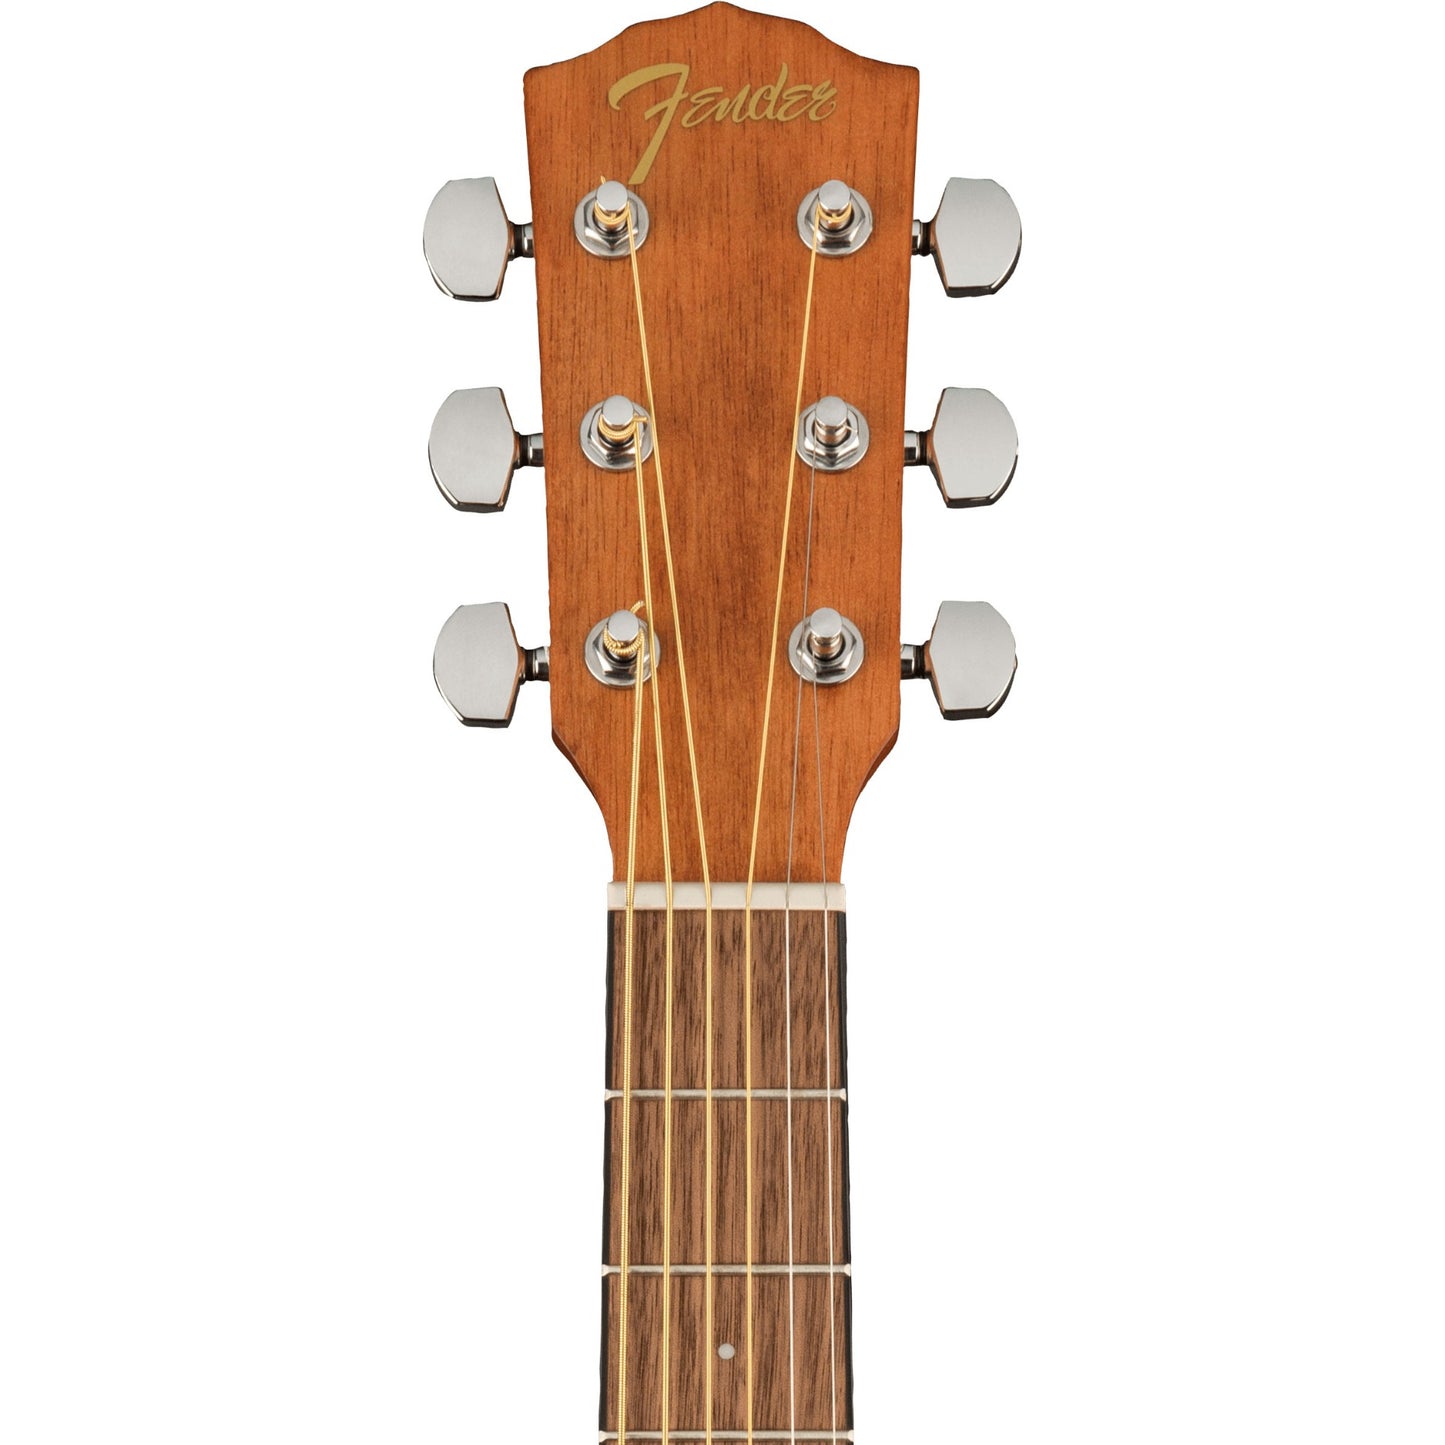 Fender FA-15 3/4 Scale Acoustic Guitar - Green